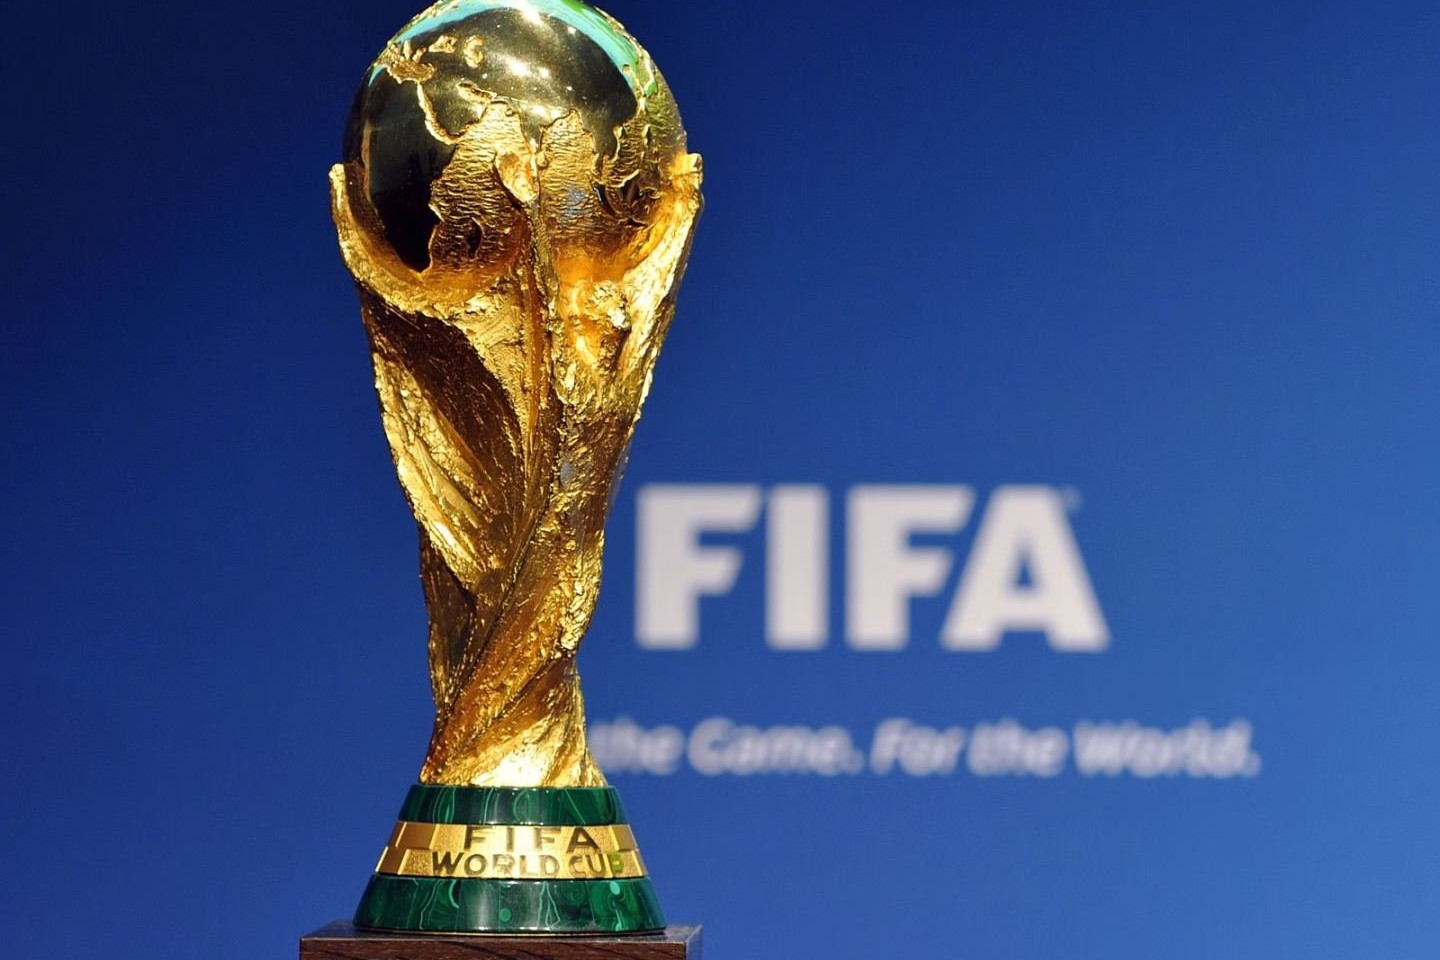 Azerbaijan supports the proposal of friendly Saudi Arabia to host the World Cup 2034